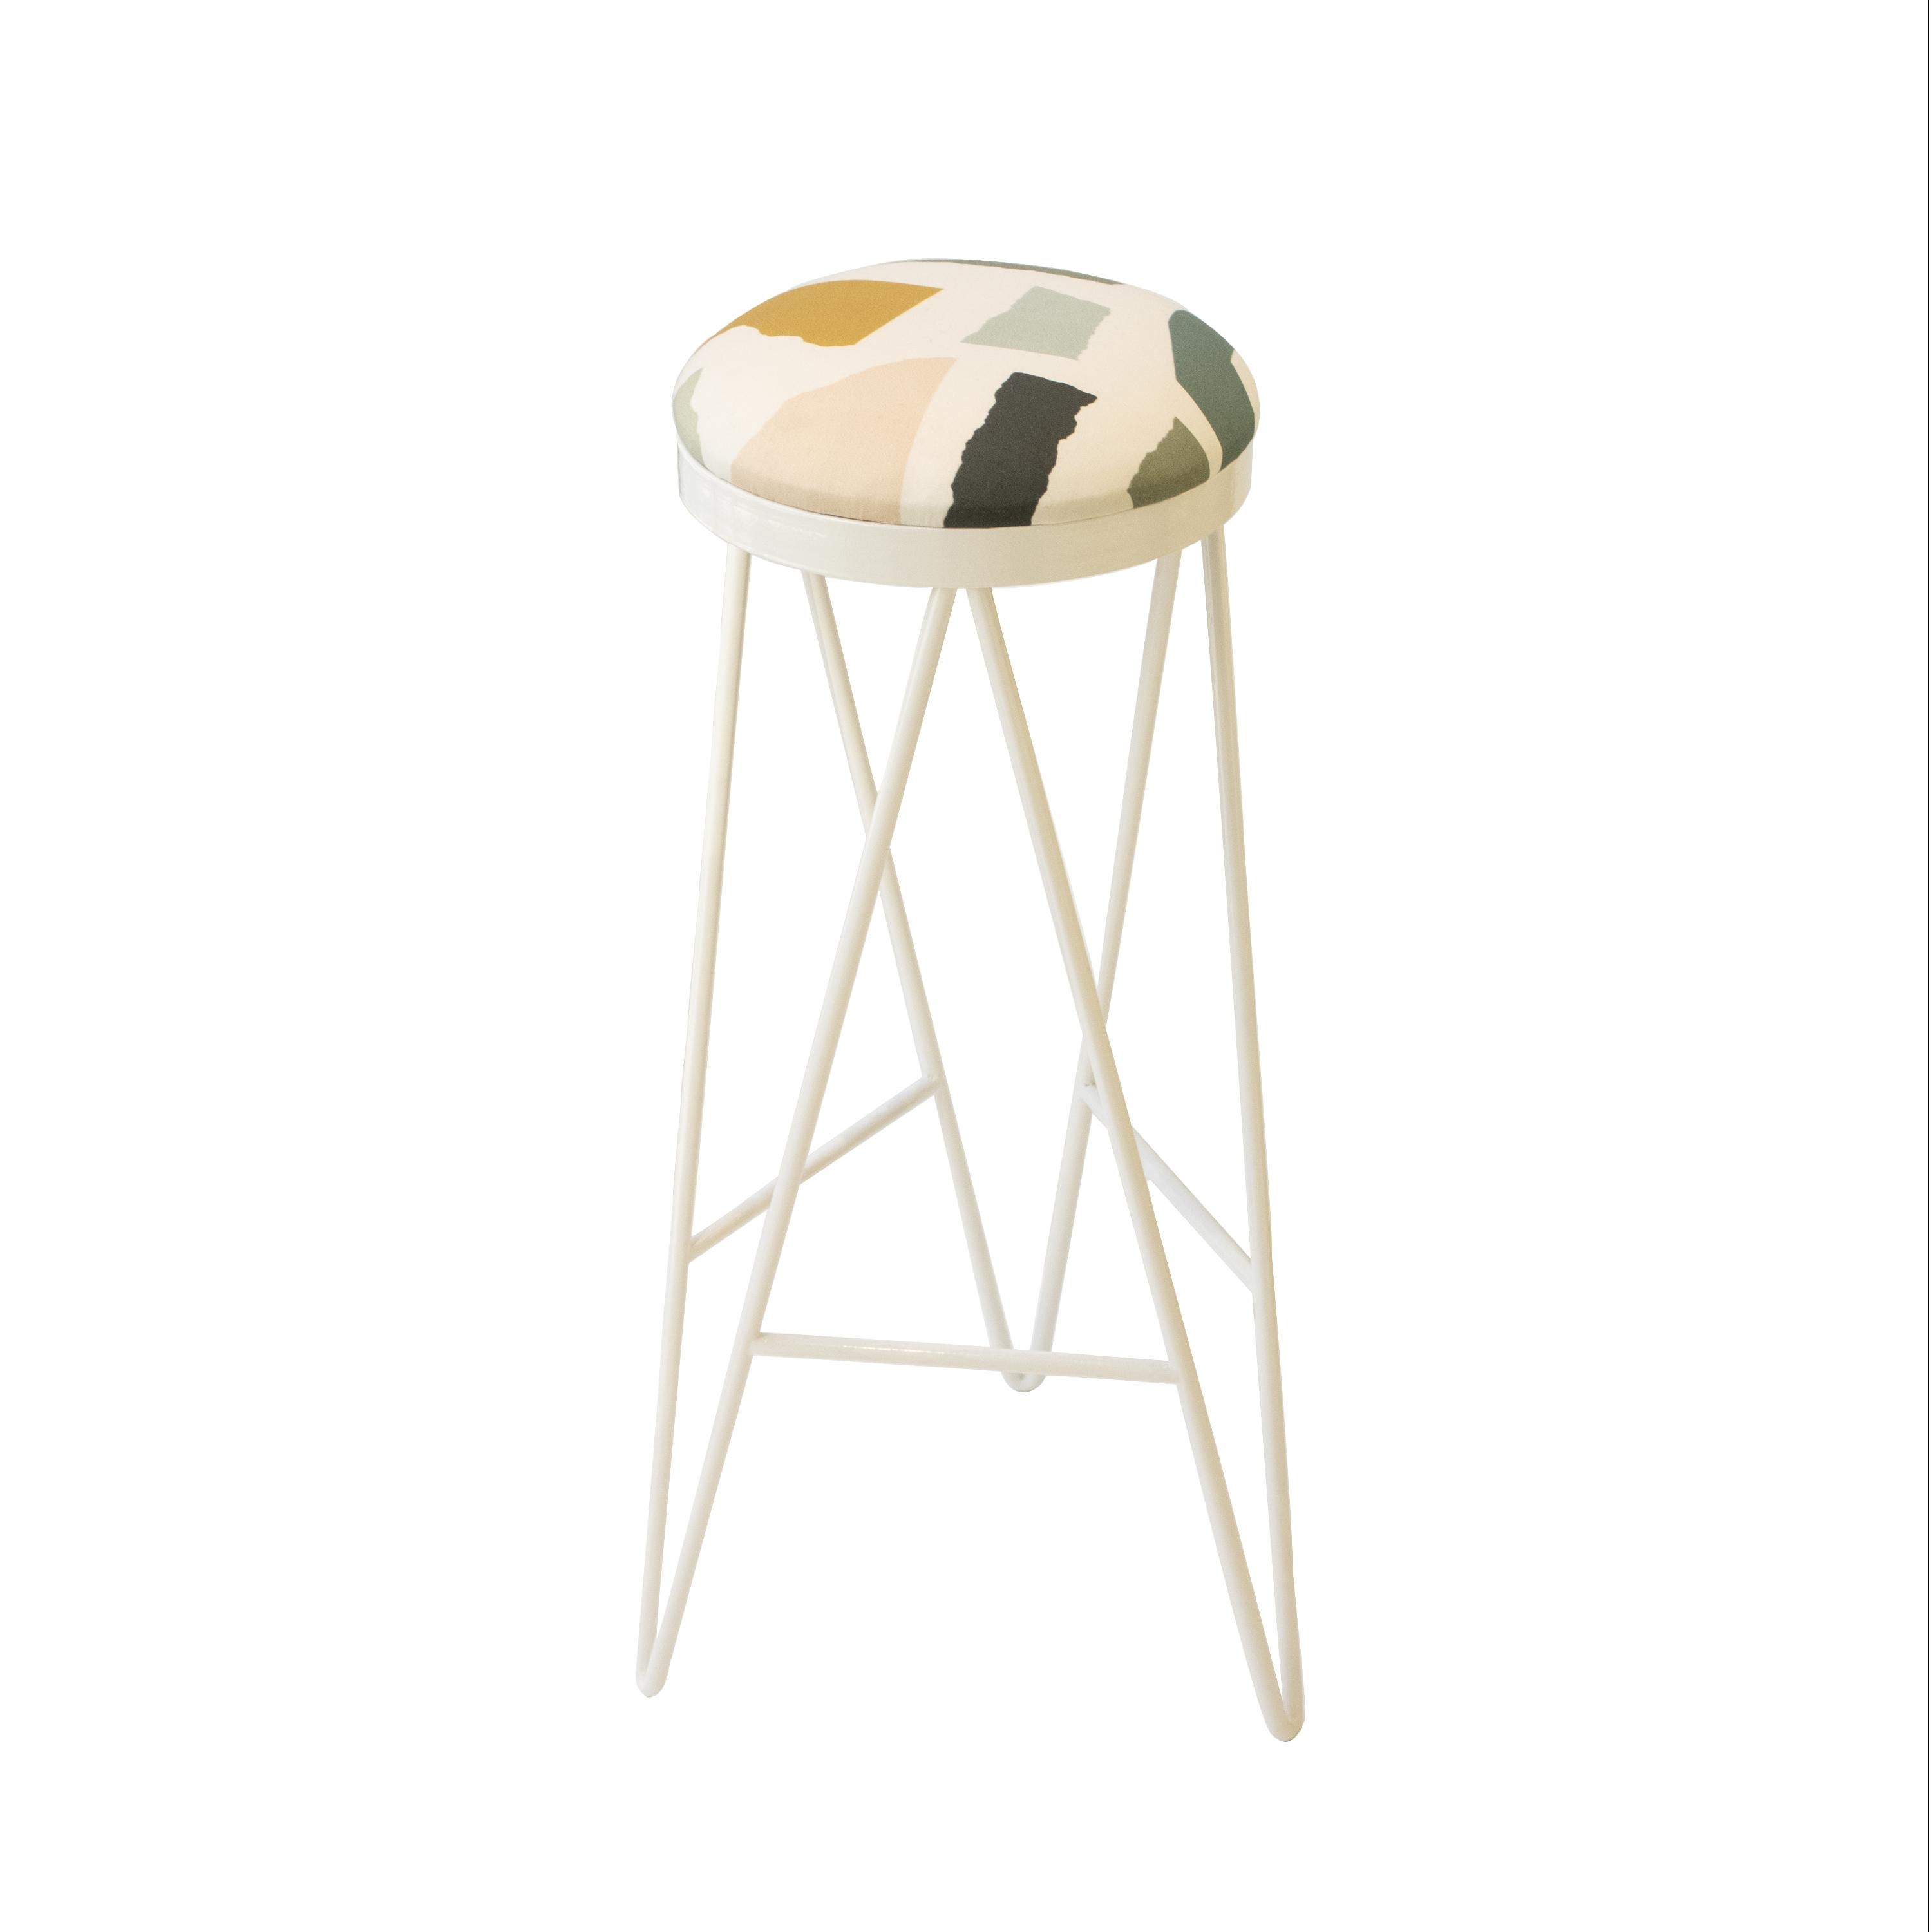 contemporary stool designed by IKB191 studio.  It consists of a Steel structure lacquered in white and a foam seat upholstered in beige cotton with a colorful Geometric Pattern. Manufacture in Spain 2022.